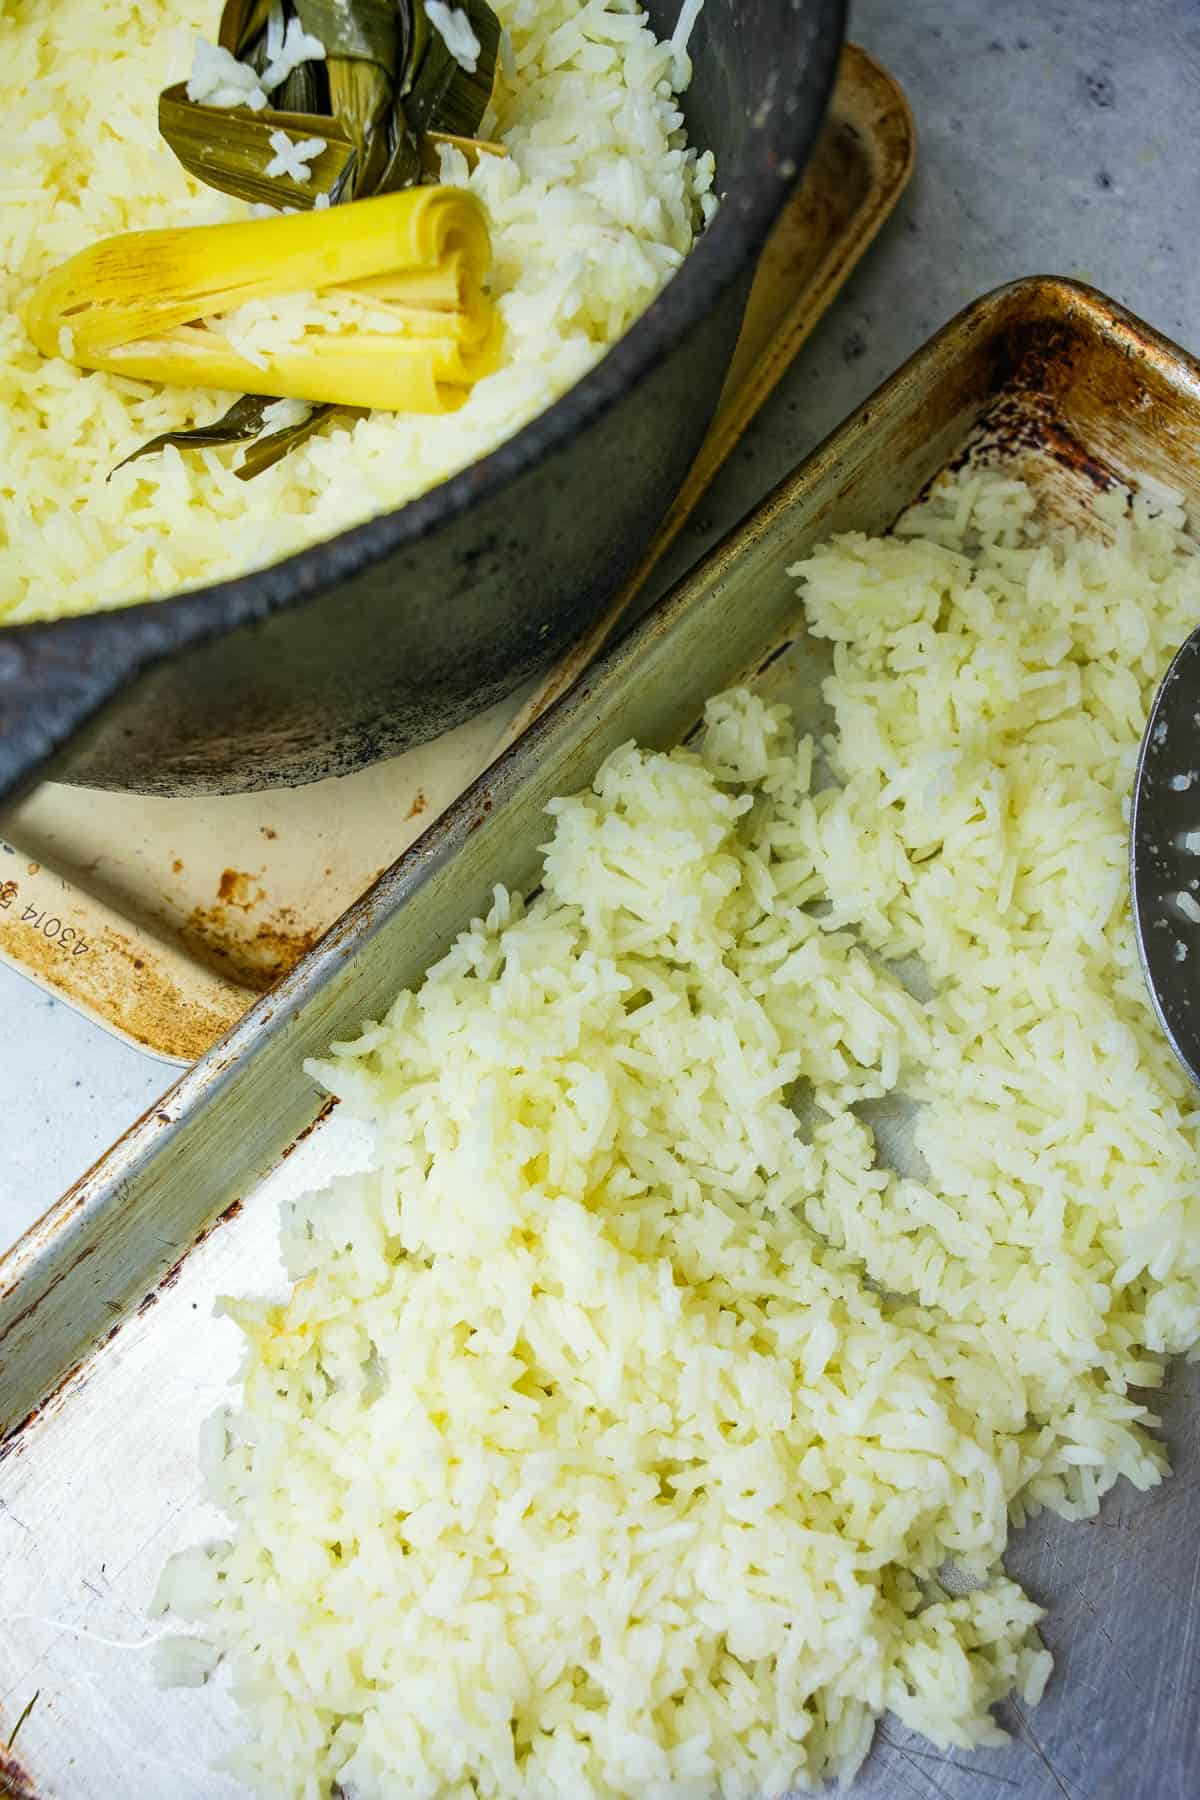 COoked rice is spread out onto a metal tray to cool. This makes handling and shaping the rice easier than dealing with it when it's hot.